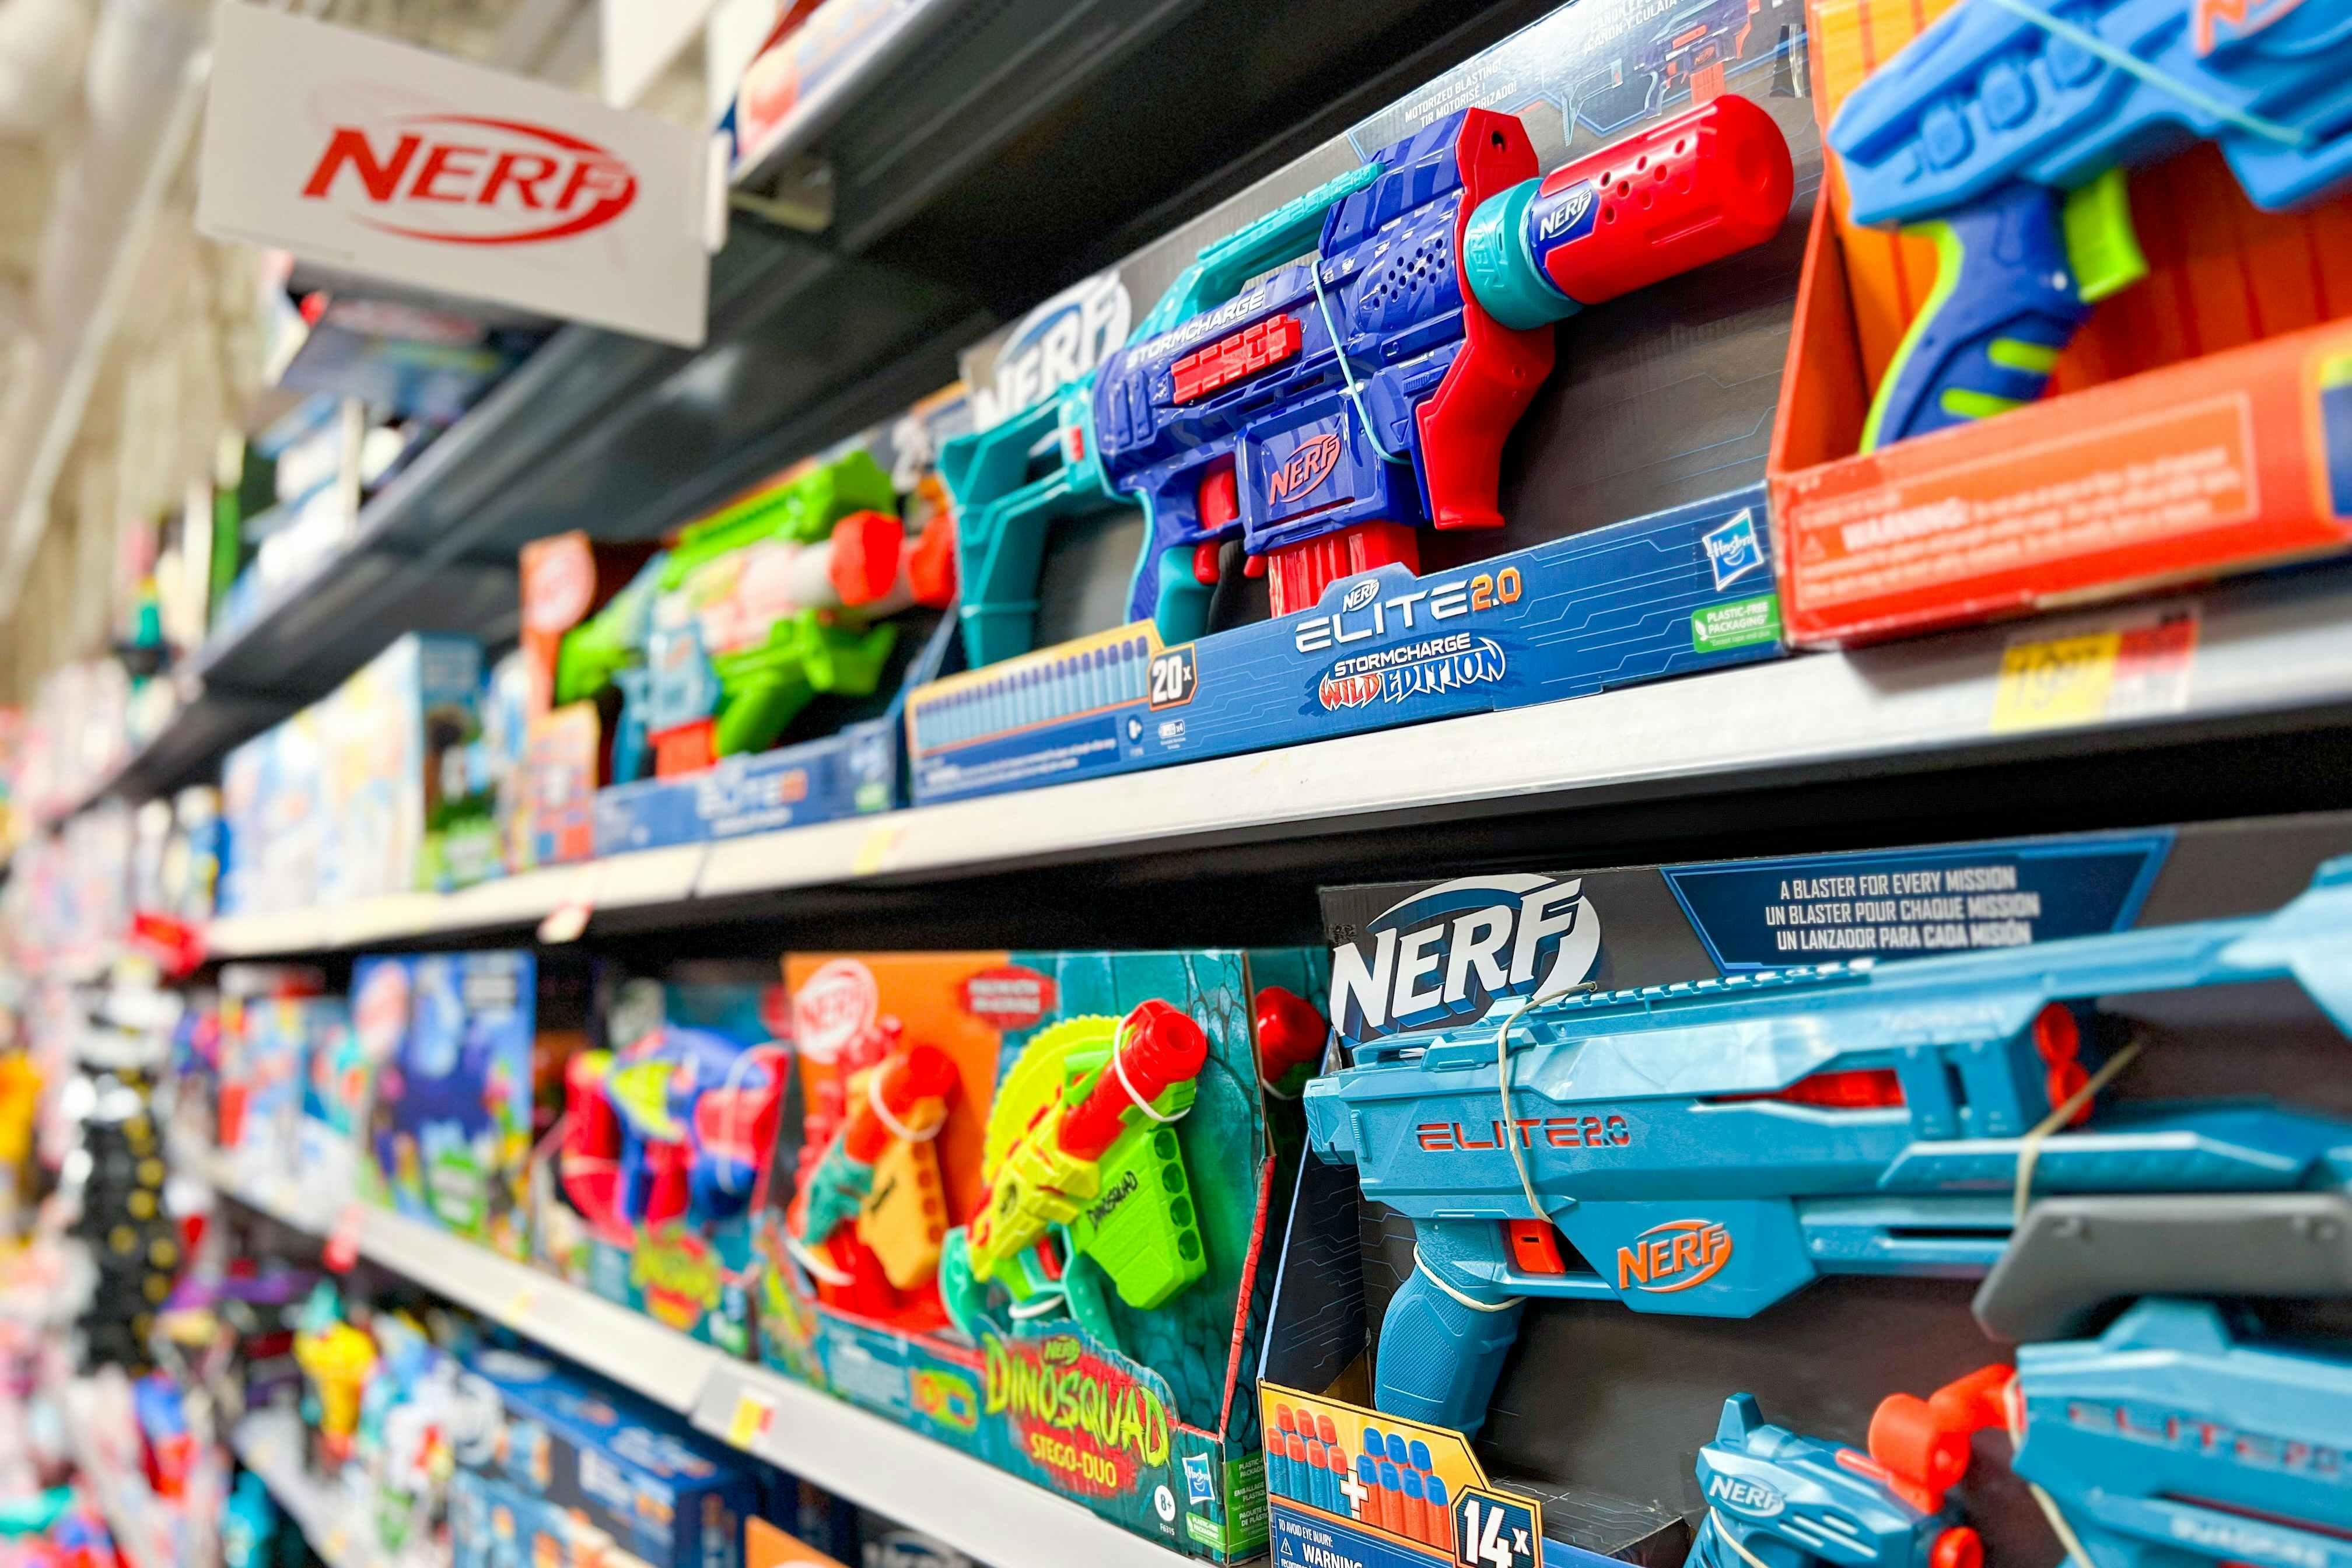 Save Up to 75% on Nerf During Amazon's Memorial Day Sale